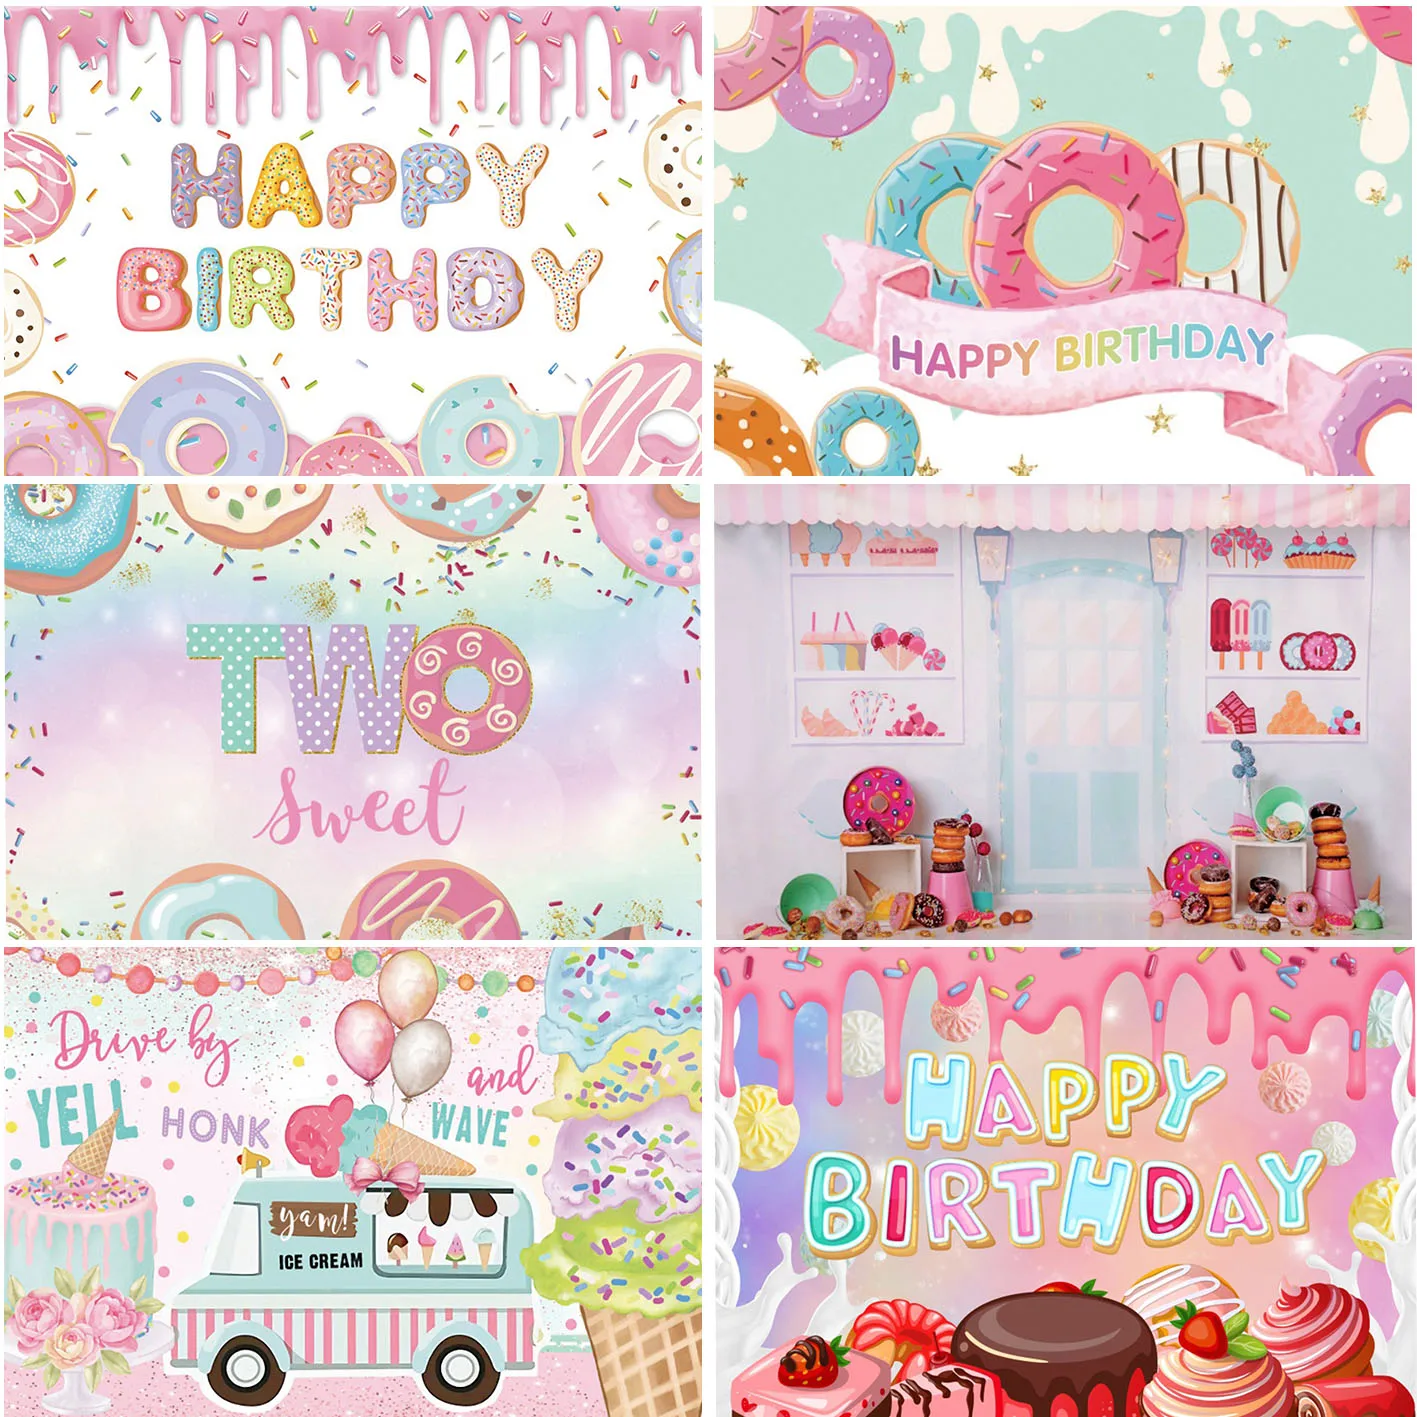 Candy Shop Theme Party Photocall Sweet Baby Birthday Backdrops Donut Ice Cream Photographic Backgrounds For Photo Studio Props